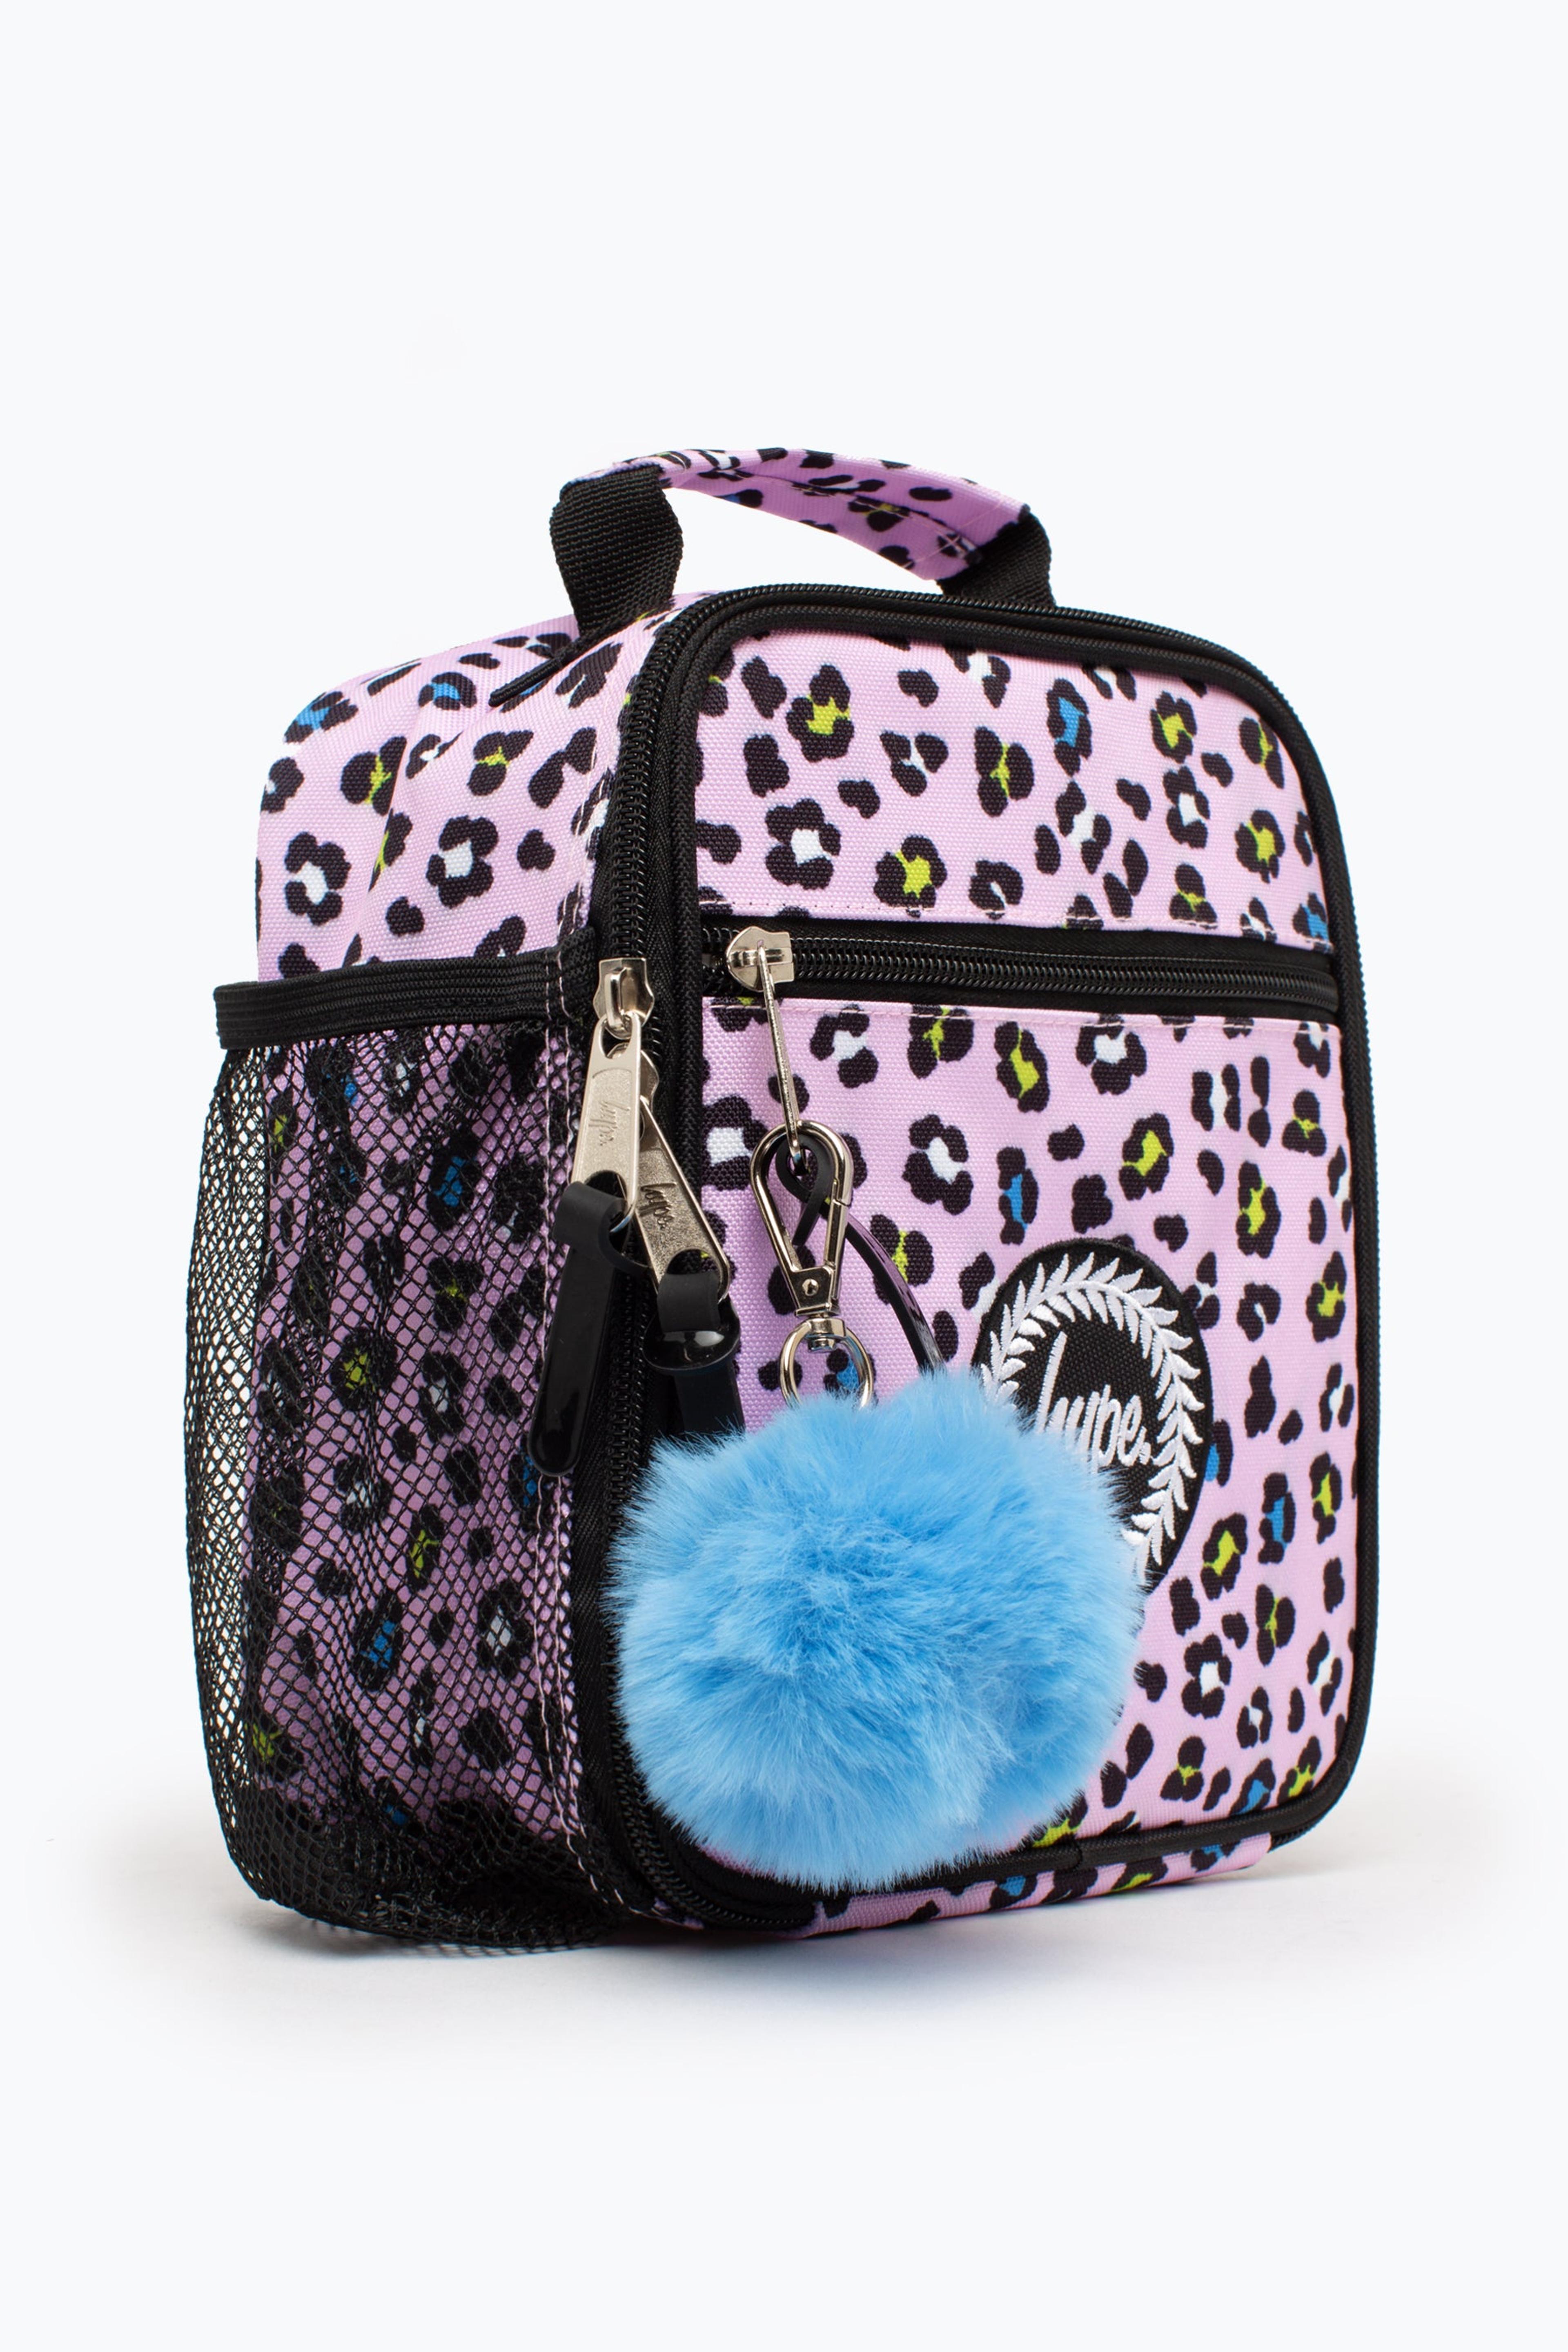 Alternate View 1 of HYPE LILAC LEOPARD LUNCH BOX